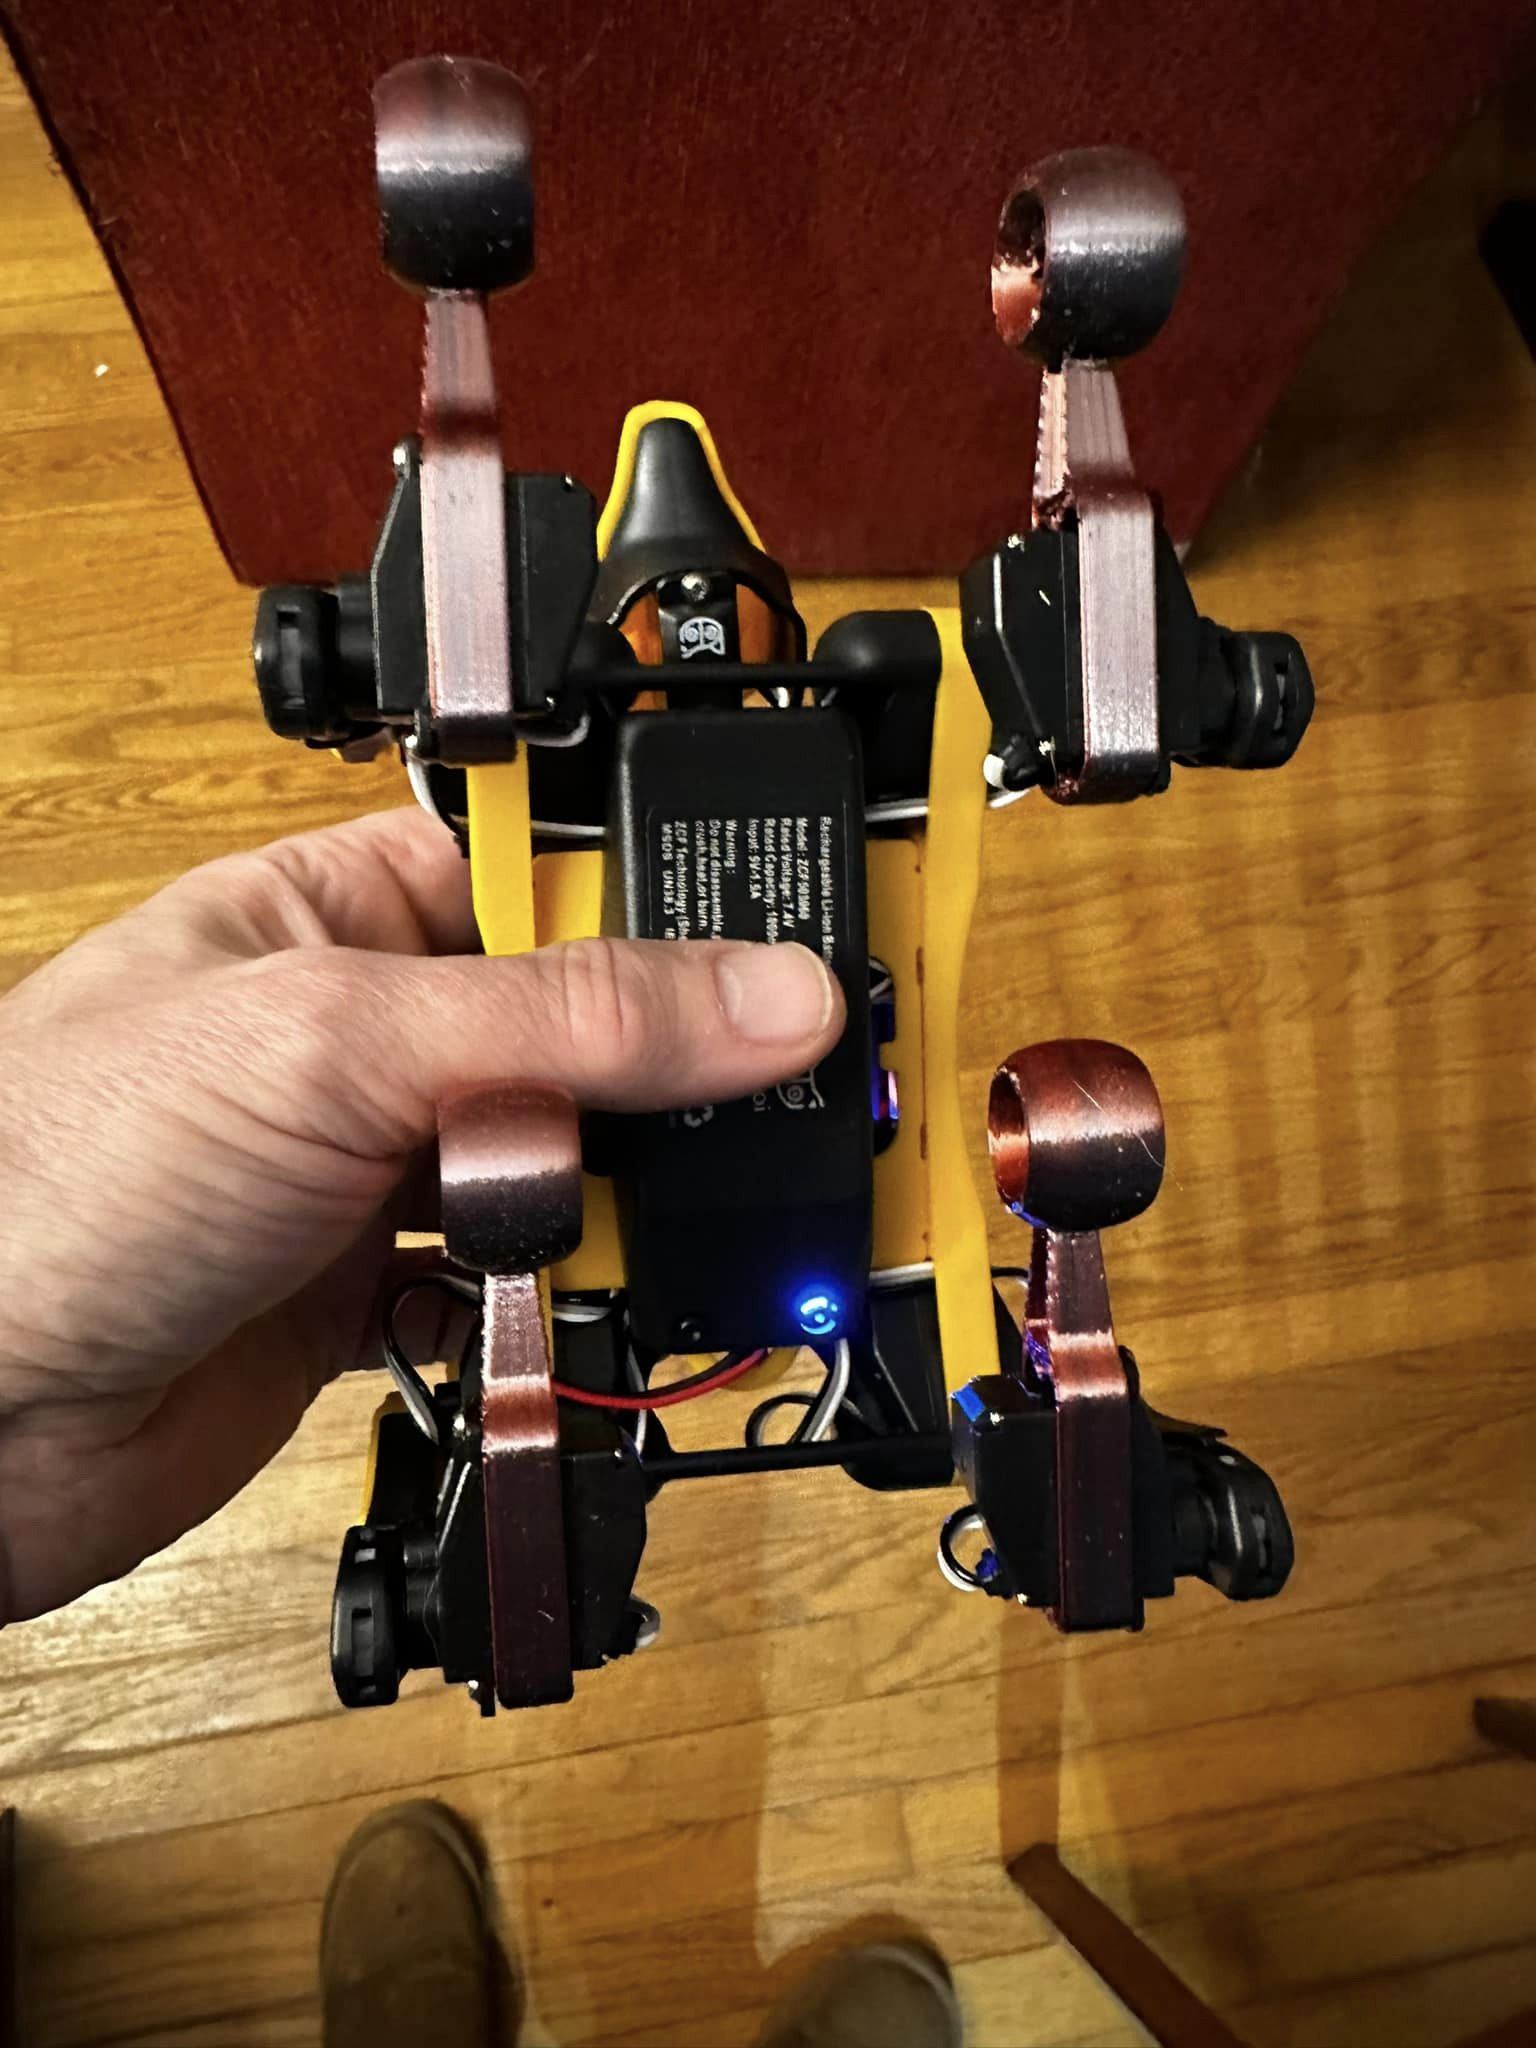 Picture of the underside of the robot dogs, with the new feet.